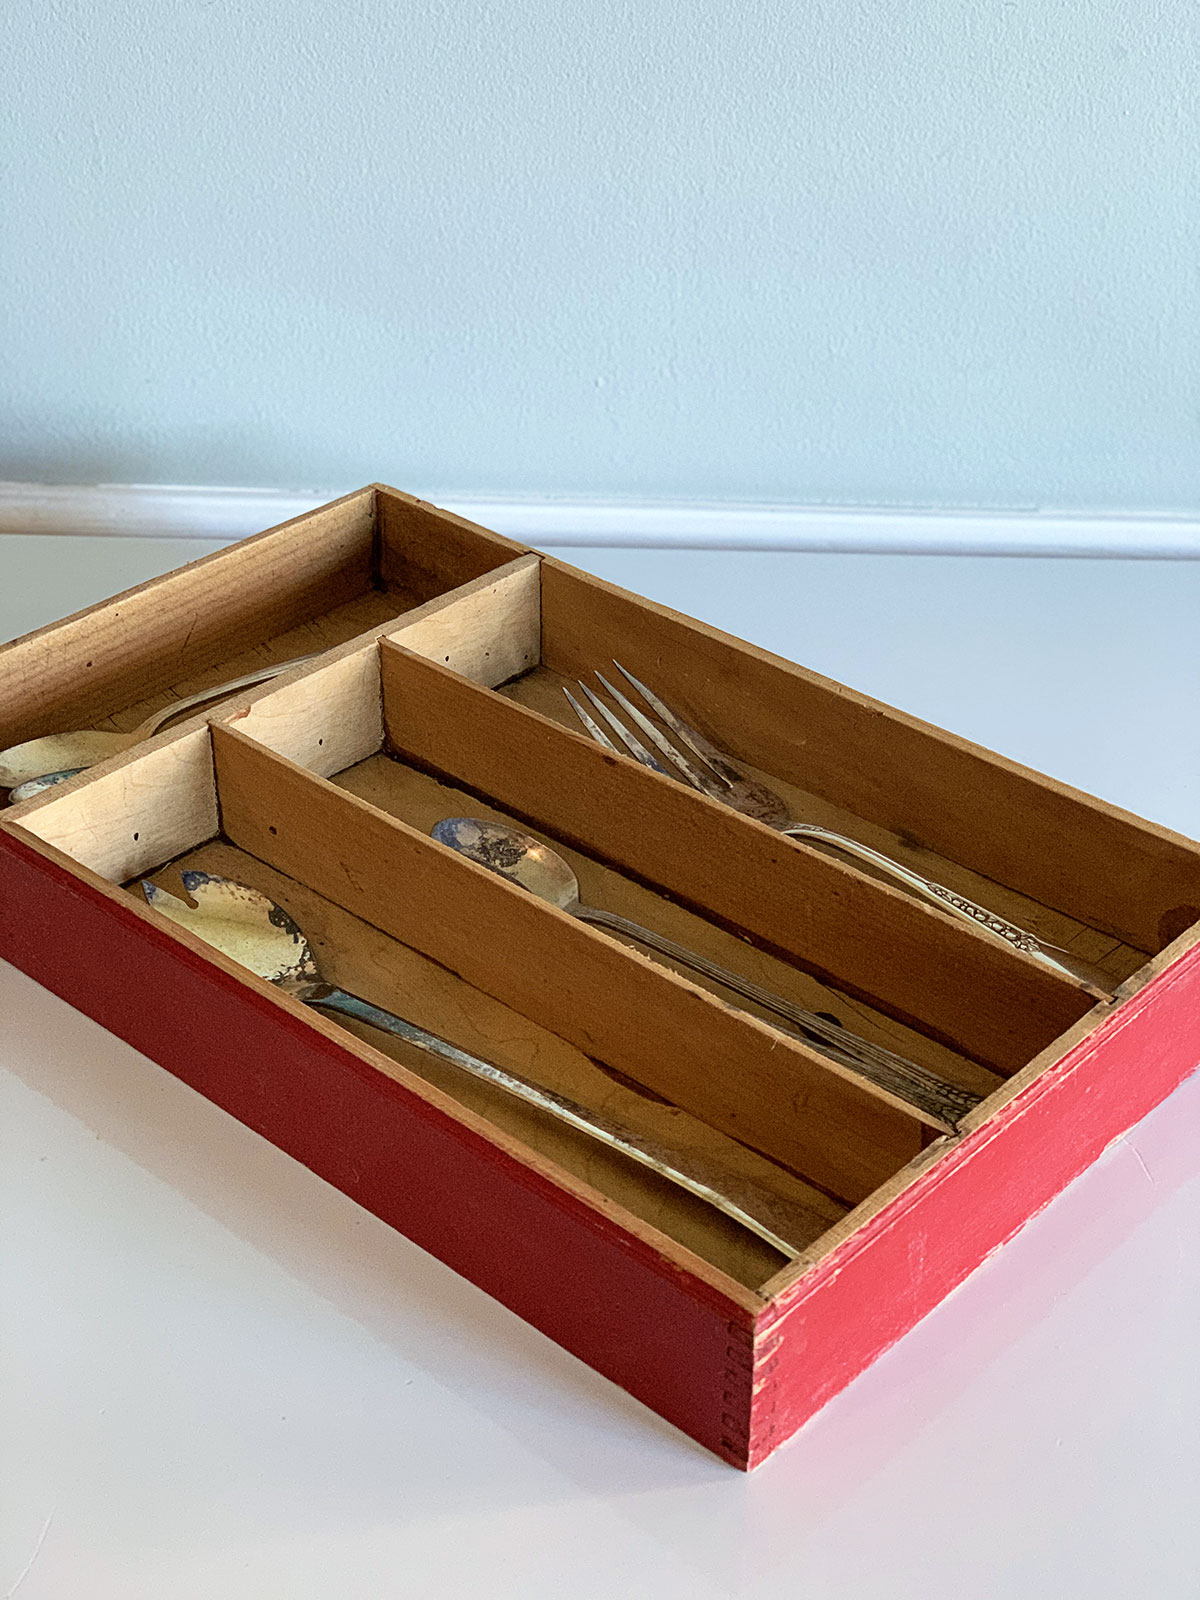 Repurposed Baking Pans Gift Box - Color Me Thrifty